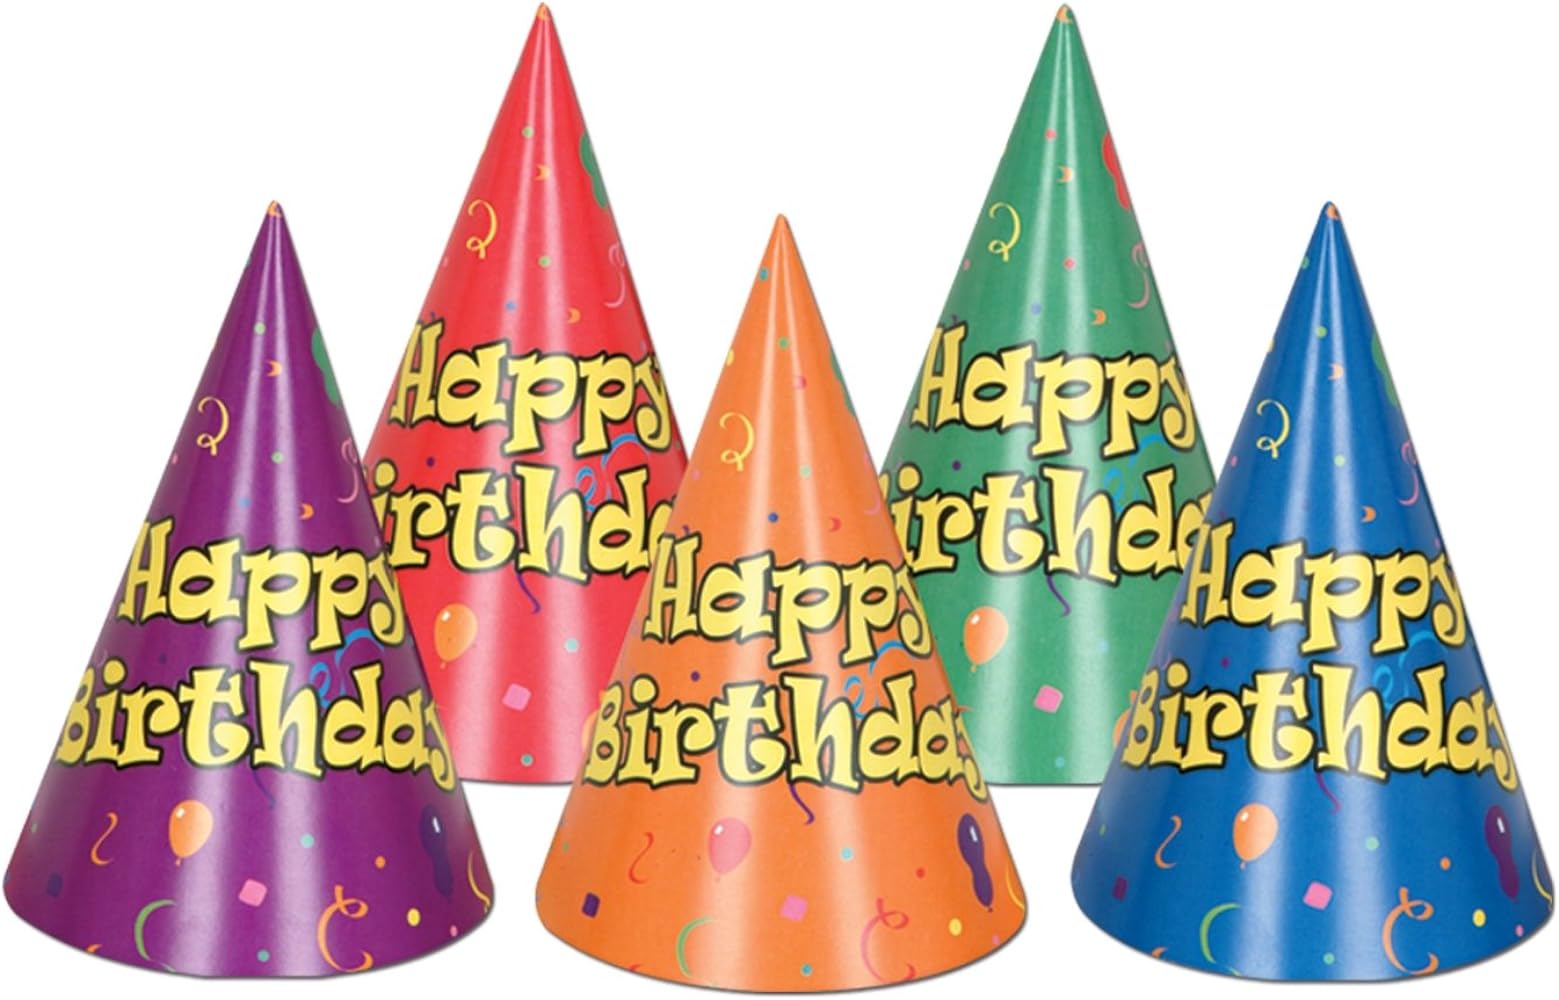 Party hats and confetti